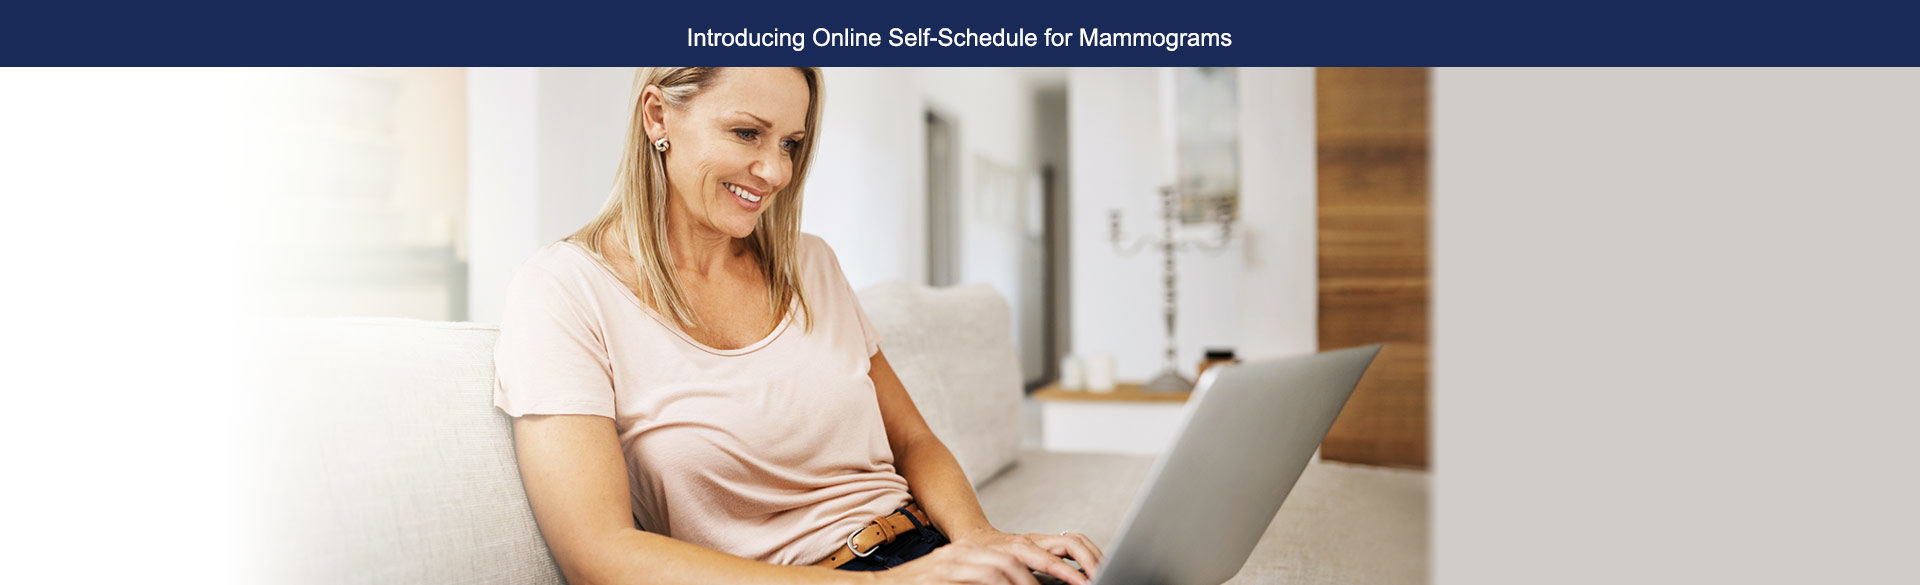 Self scheduling mammography